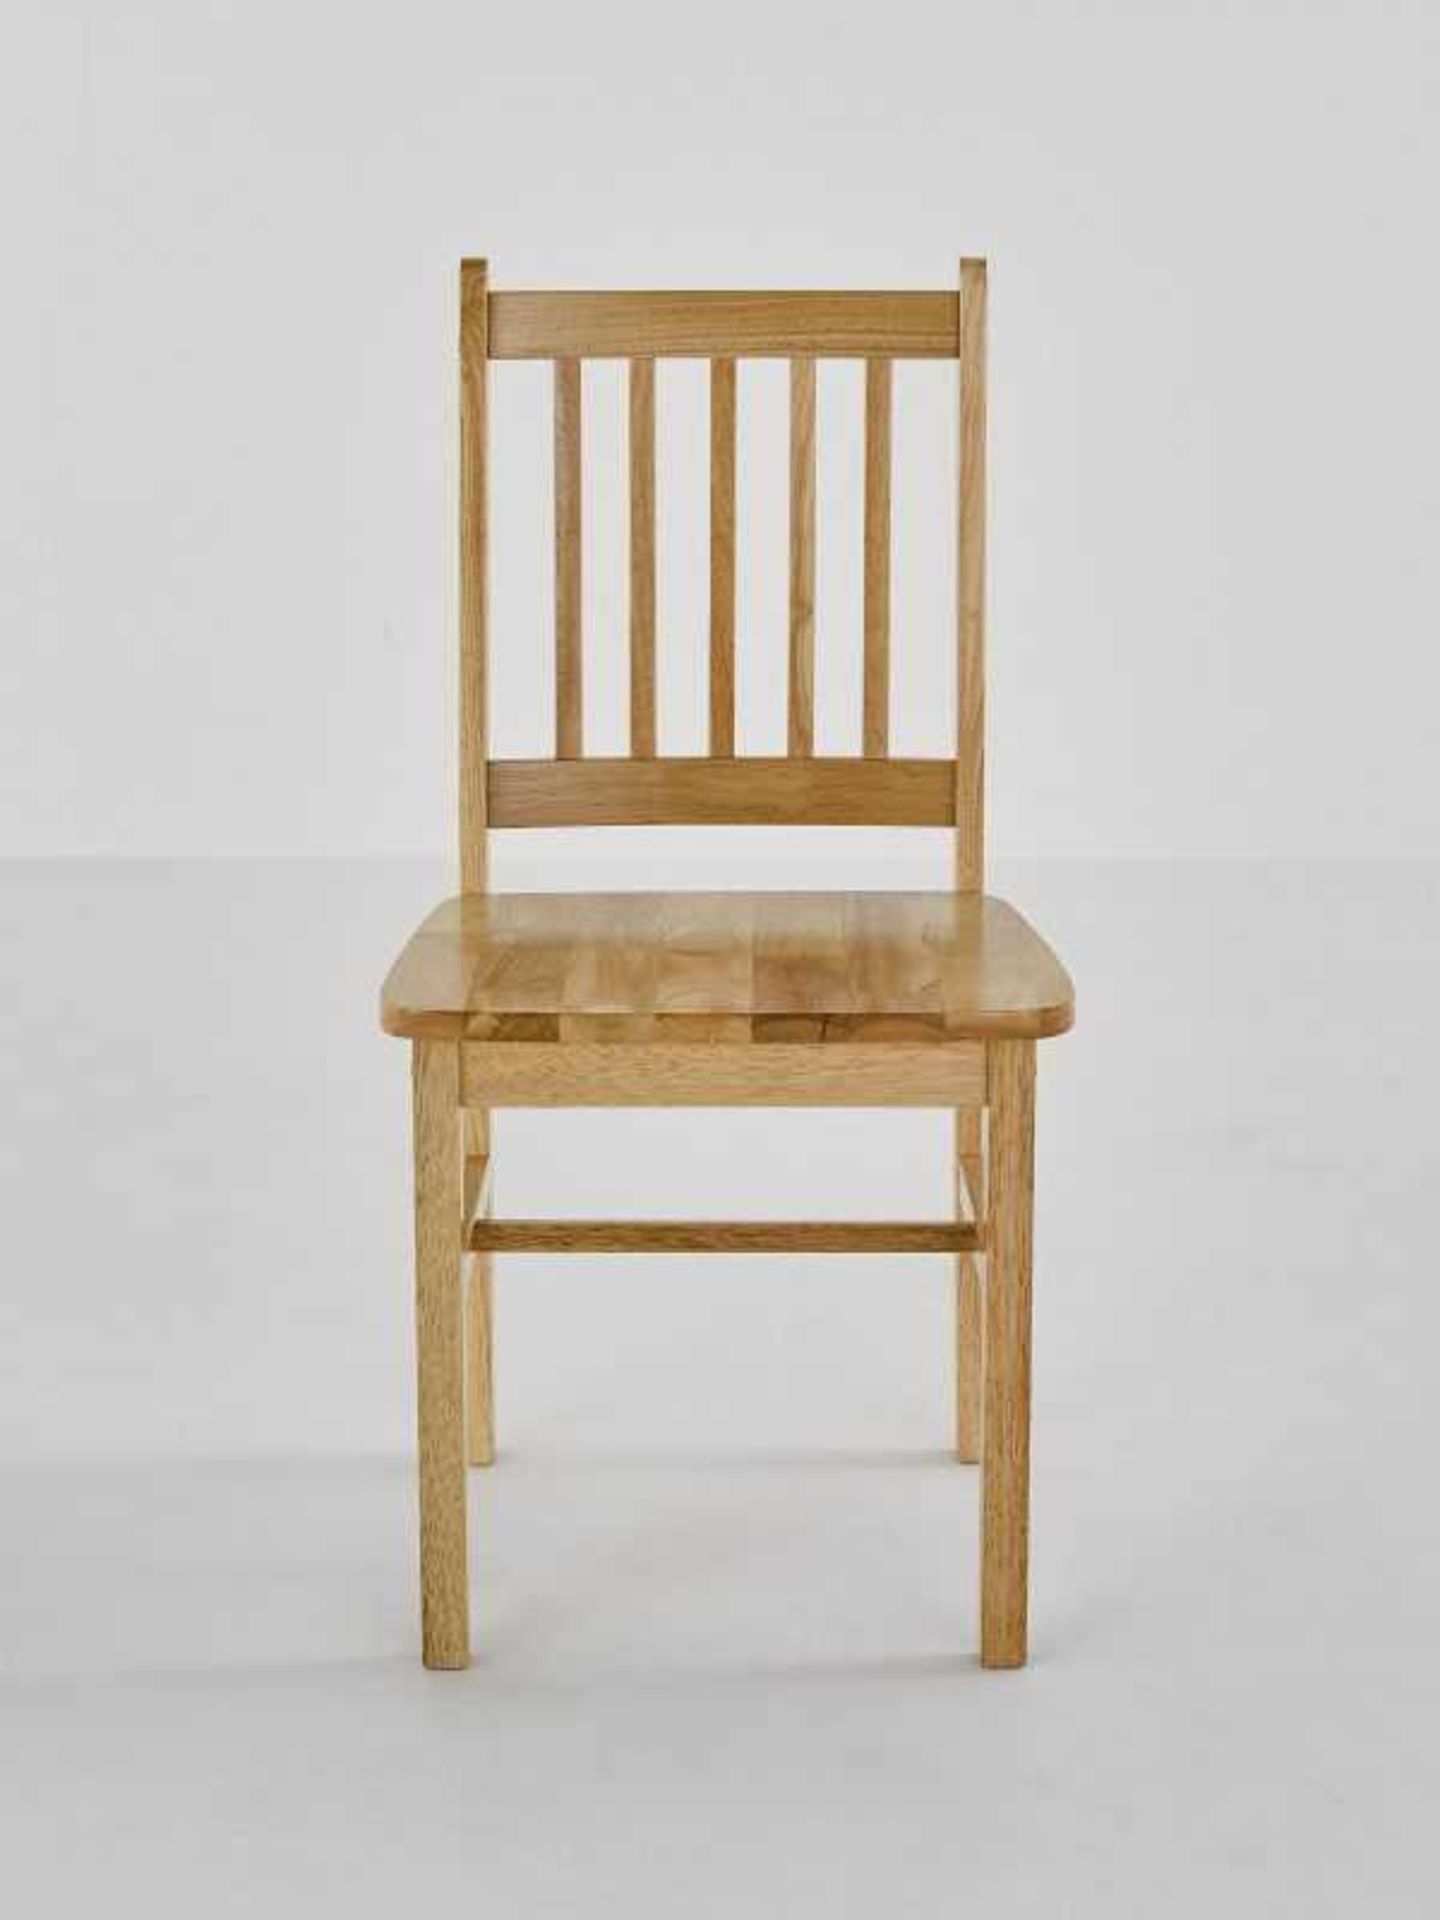 RRP £100 Boxed Malay Chair Wooden Seat In Natural Wood Colour